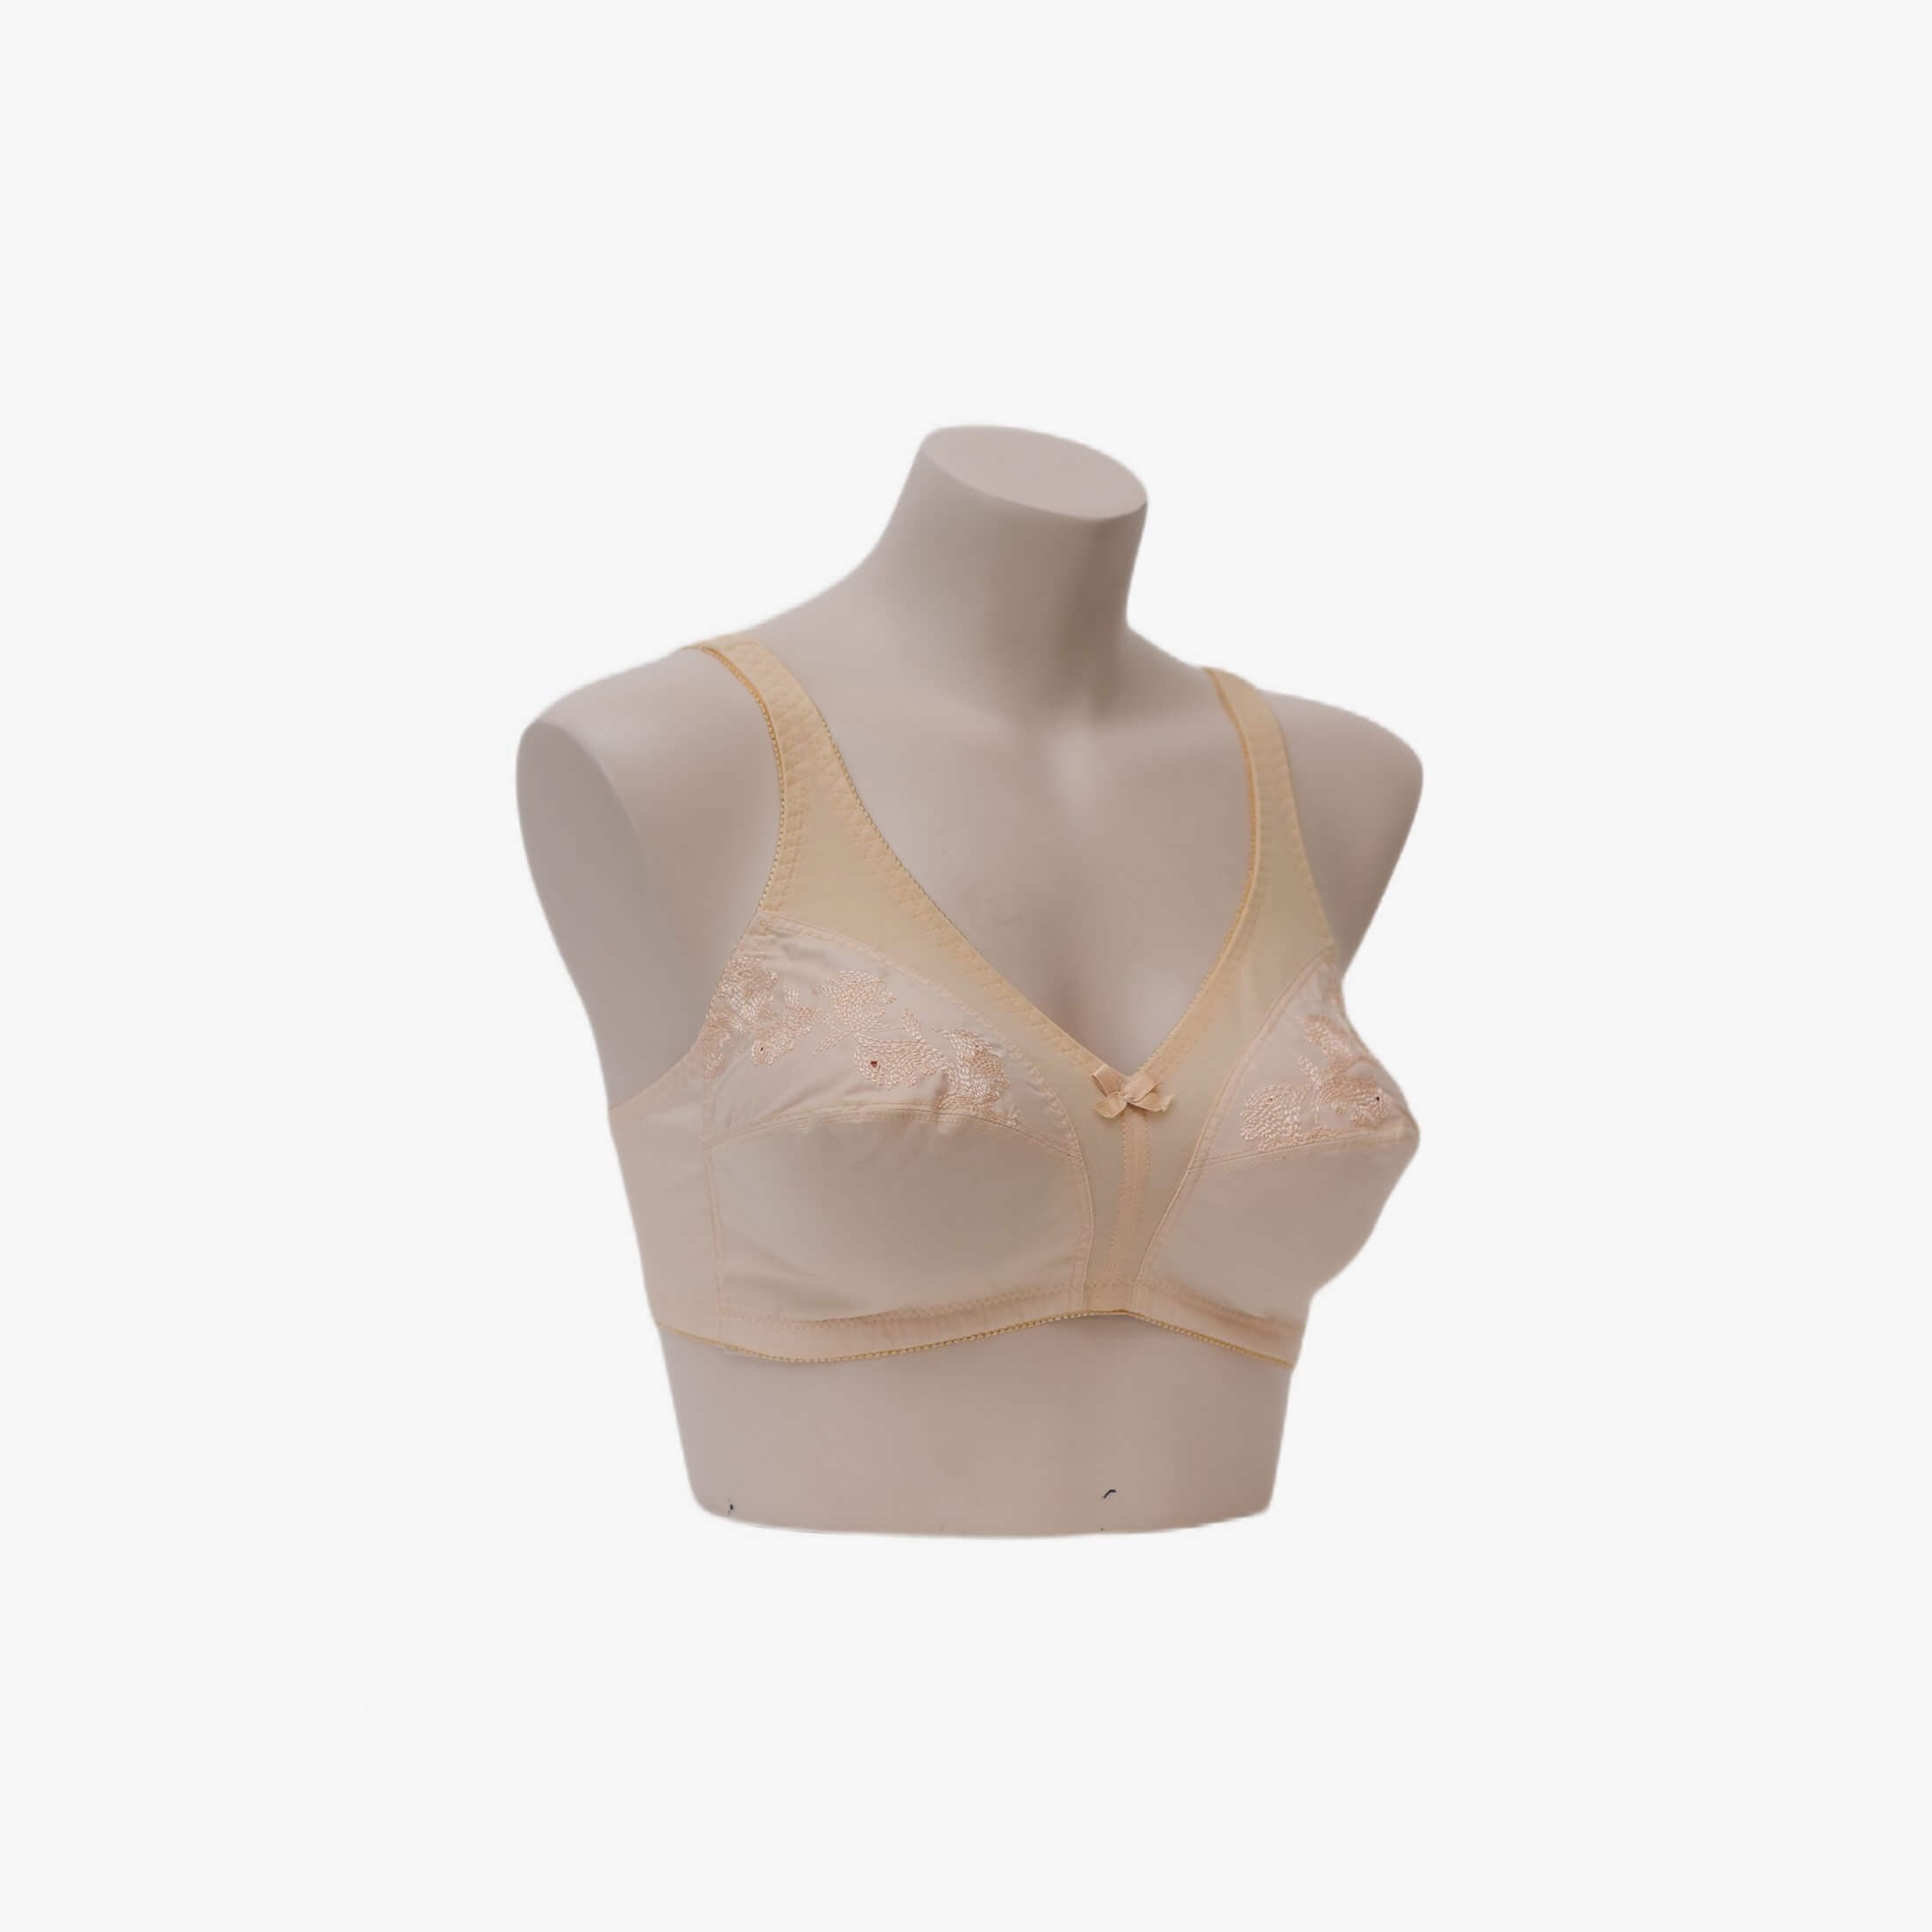 Buy IFG Classic Deluxe Soft Bra, Black Online at Best Price in Pakistan 